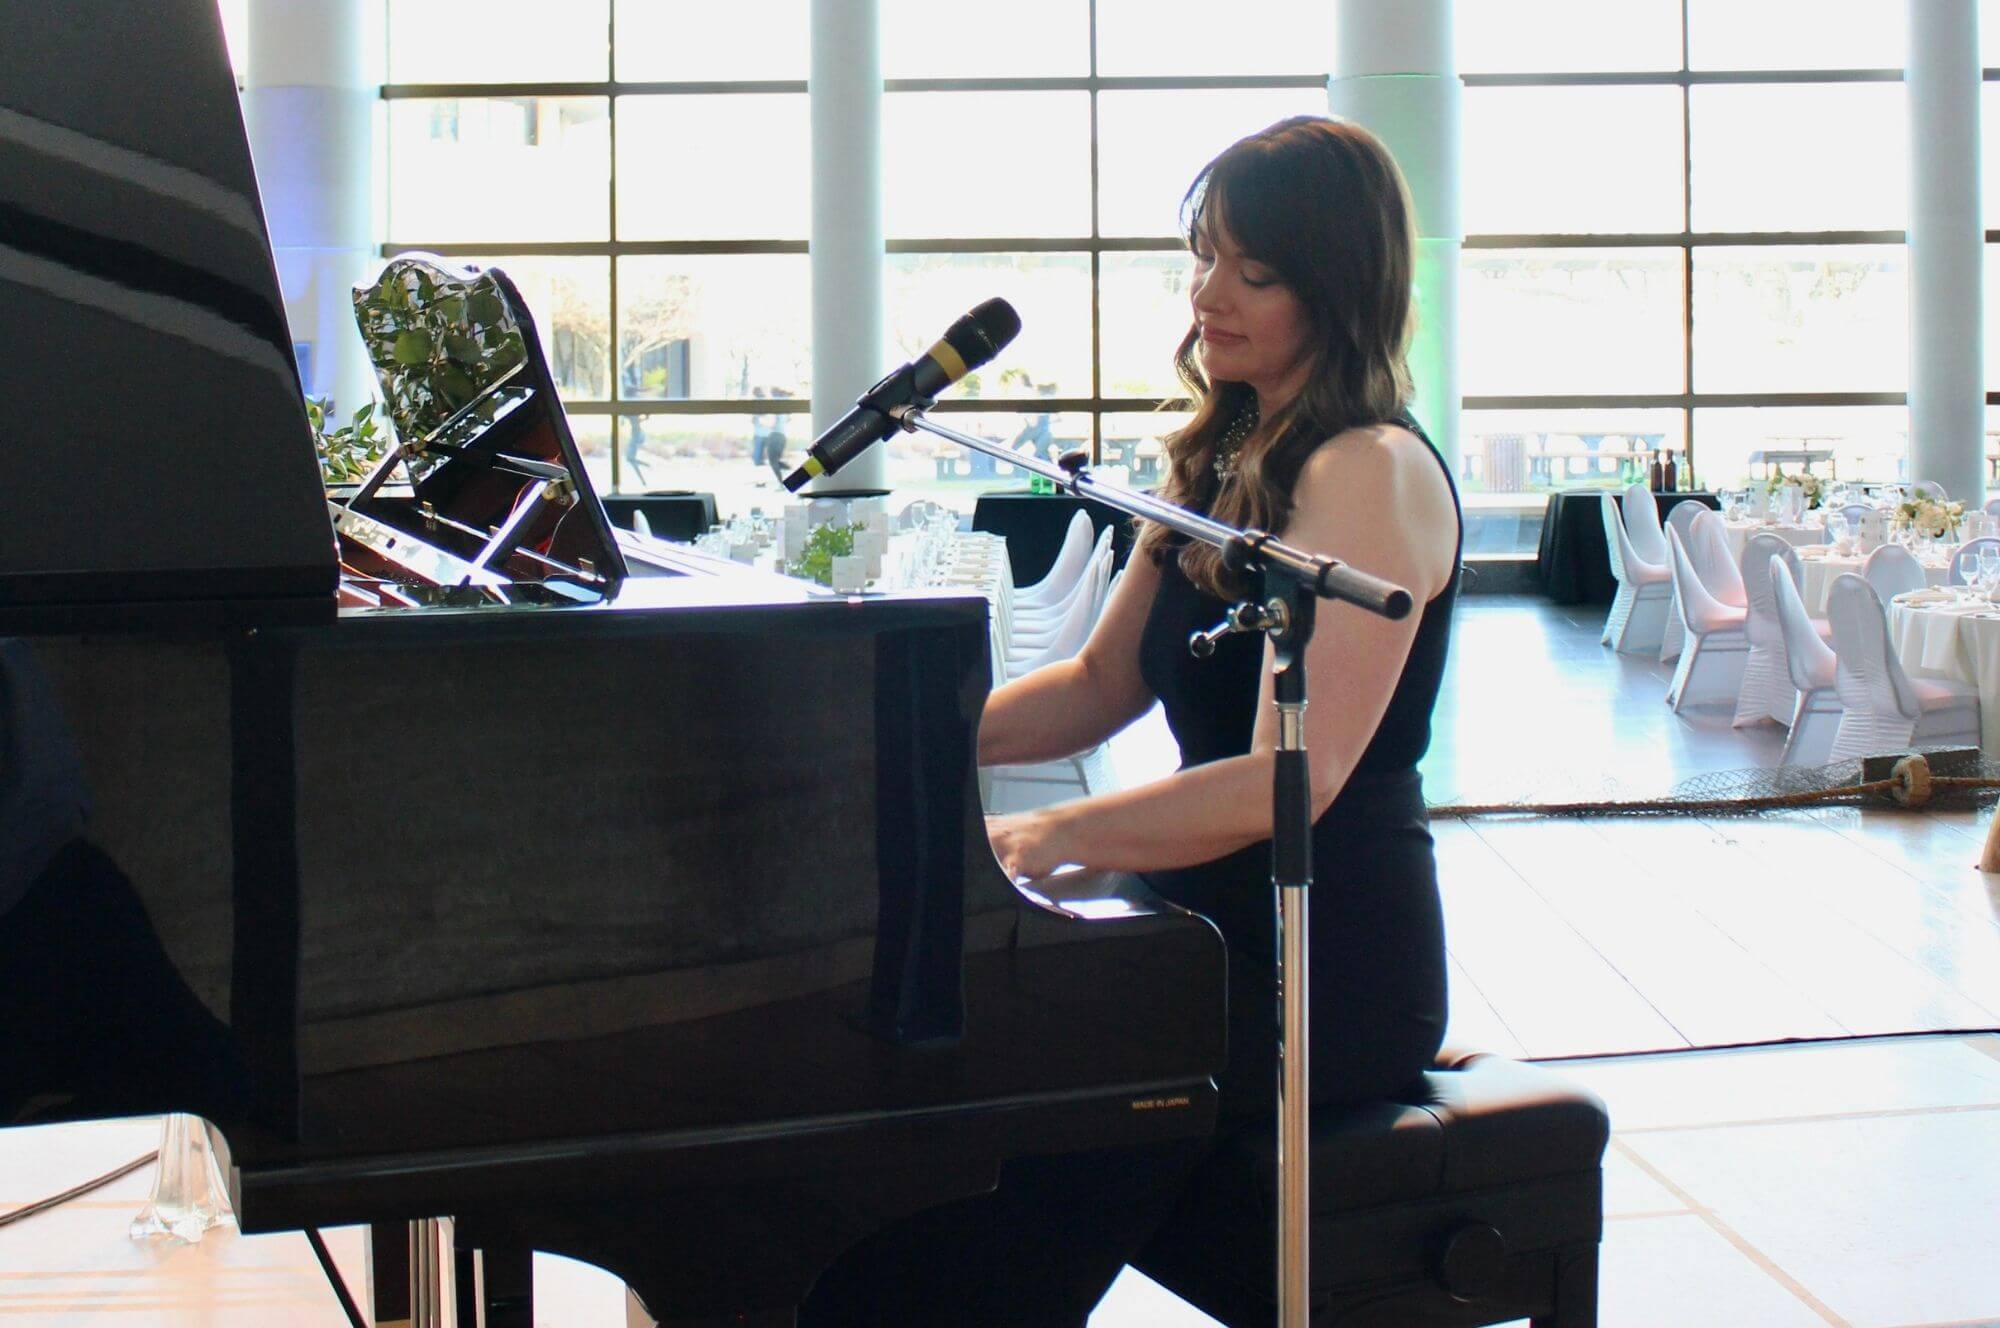 Singer & Pianist performing at Canadian Museum of History Great Hall